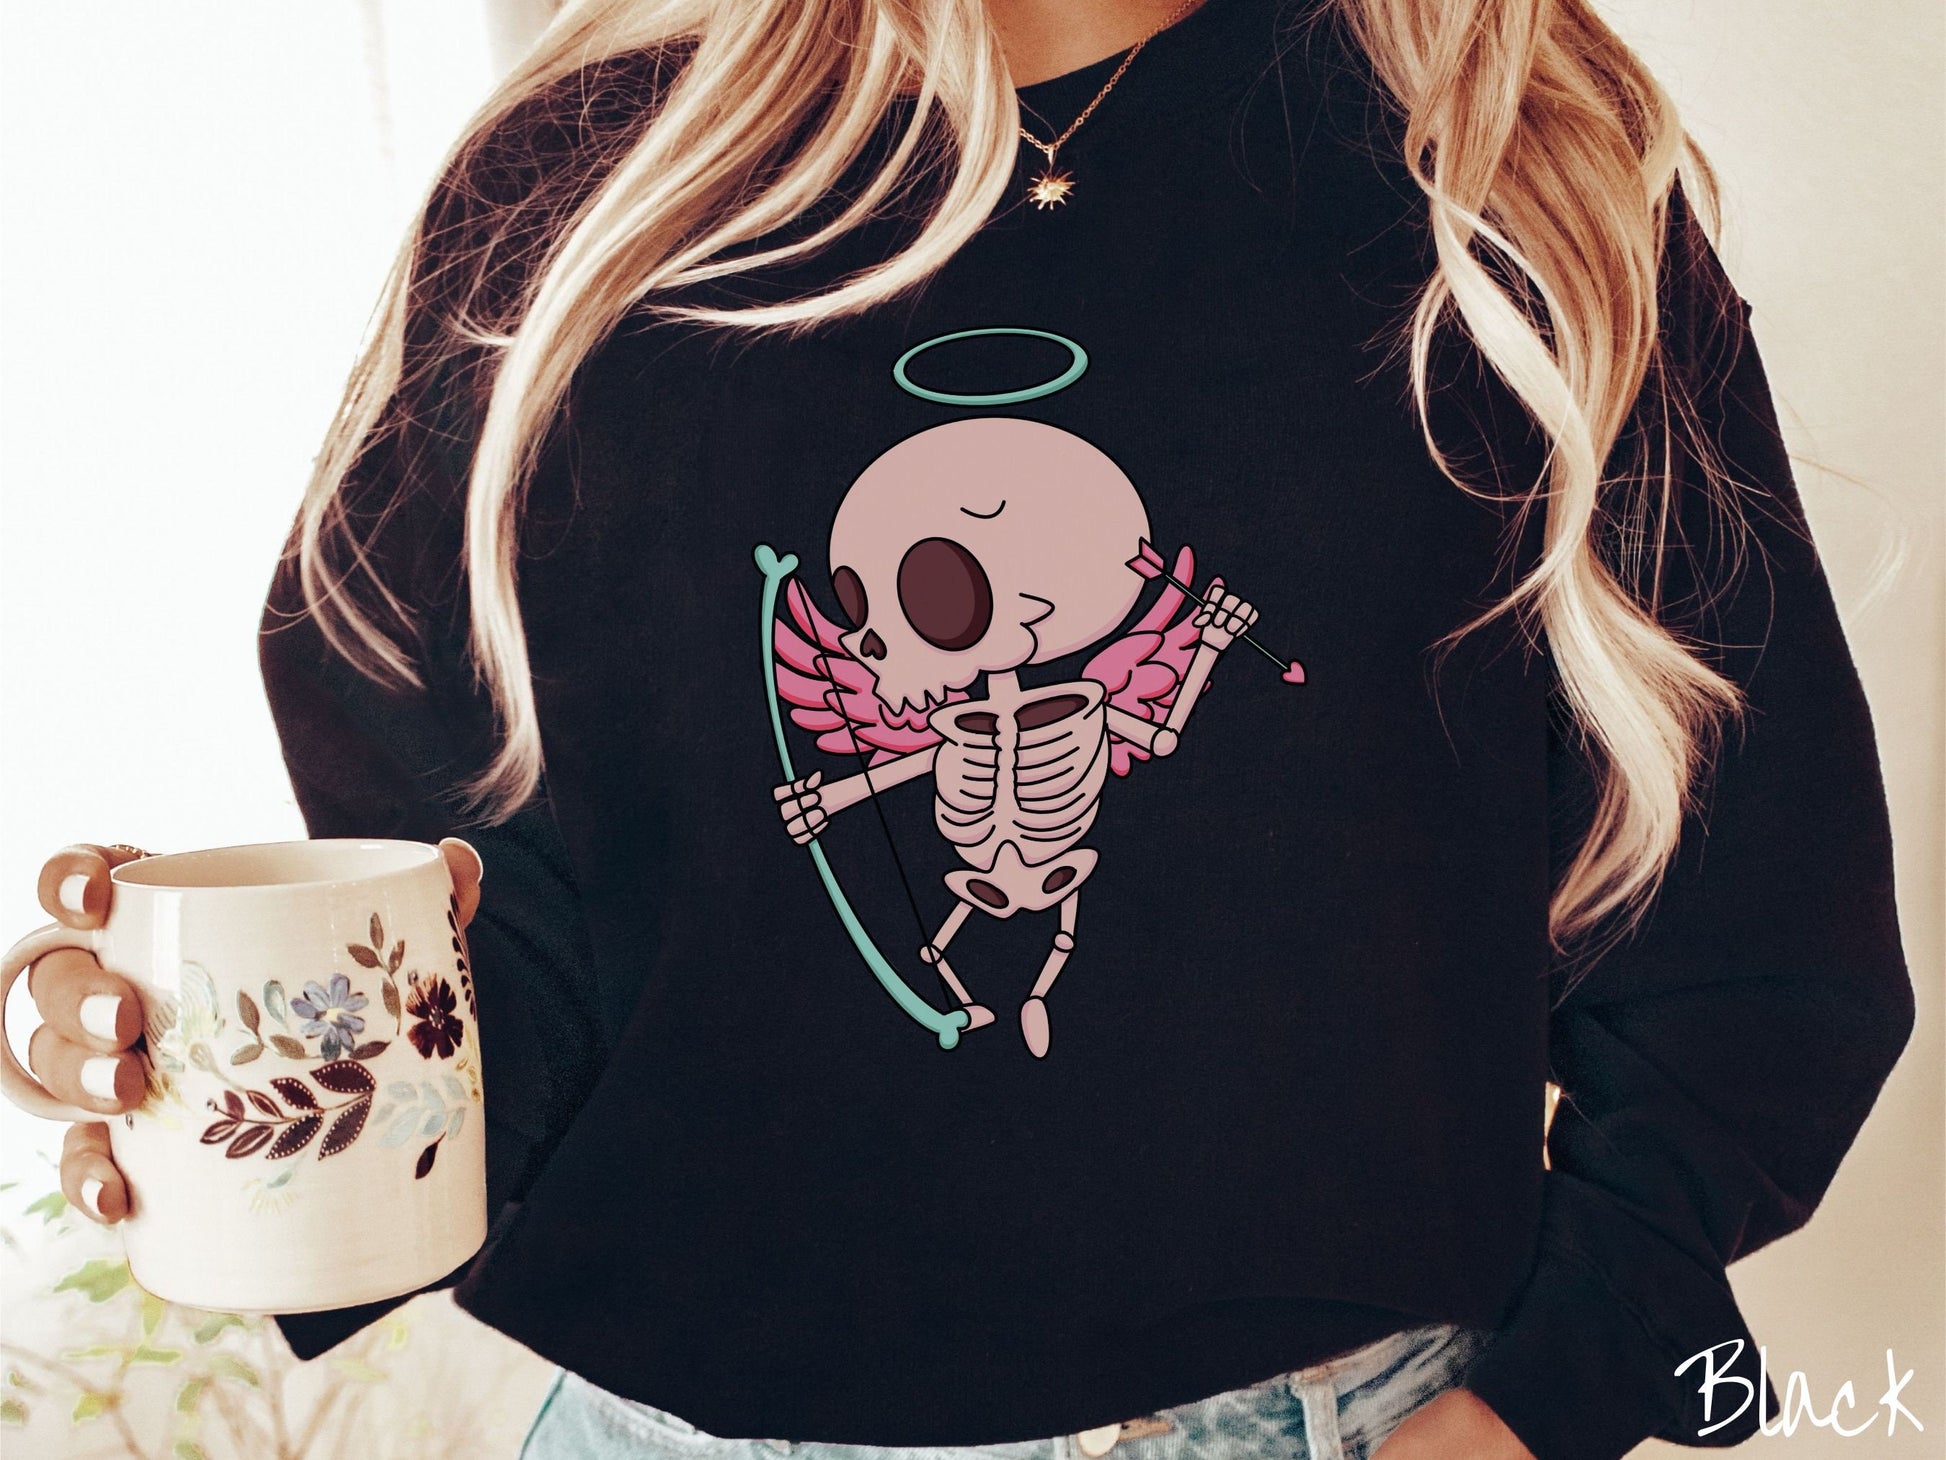 A woman wearing a cute black colored sweatshirt with a pink winged baby skeleton cupid with a halo holding a heart-tipped arrow in its left hand and a bow in its right hand.